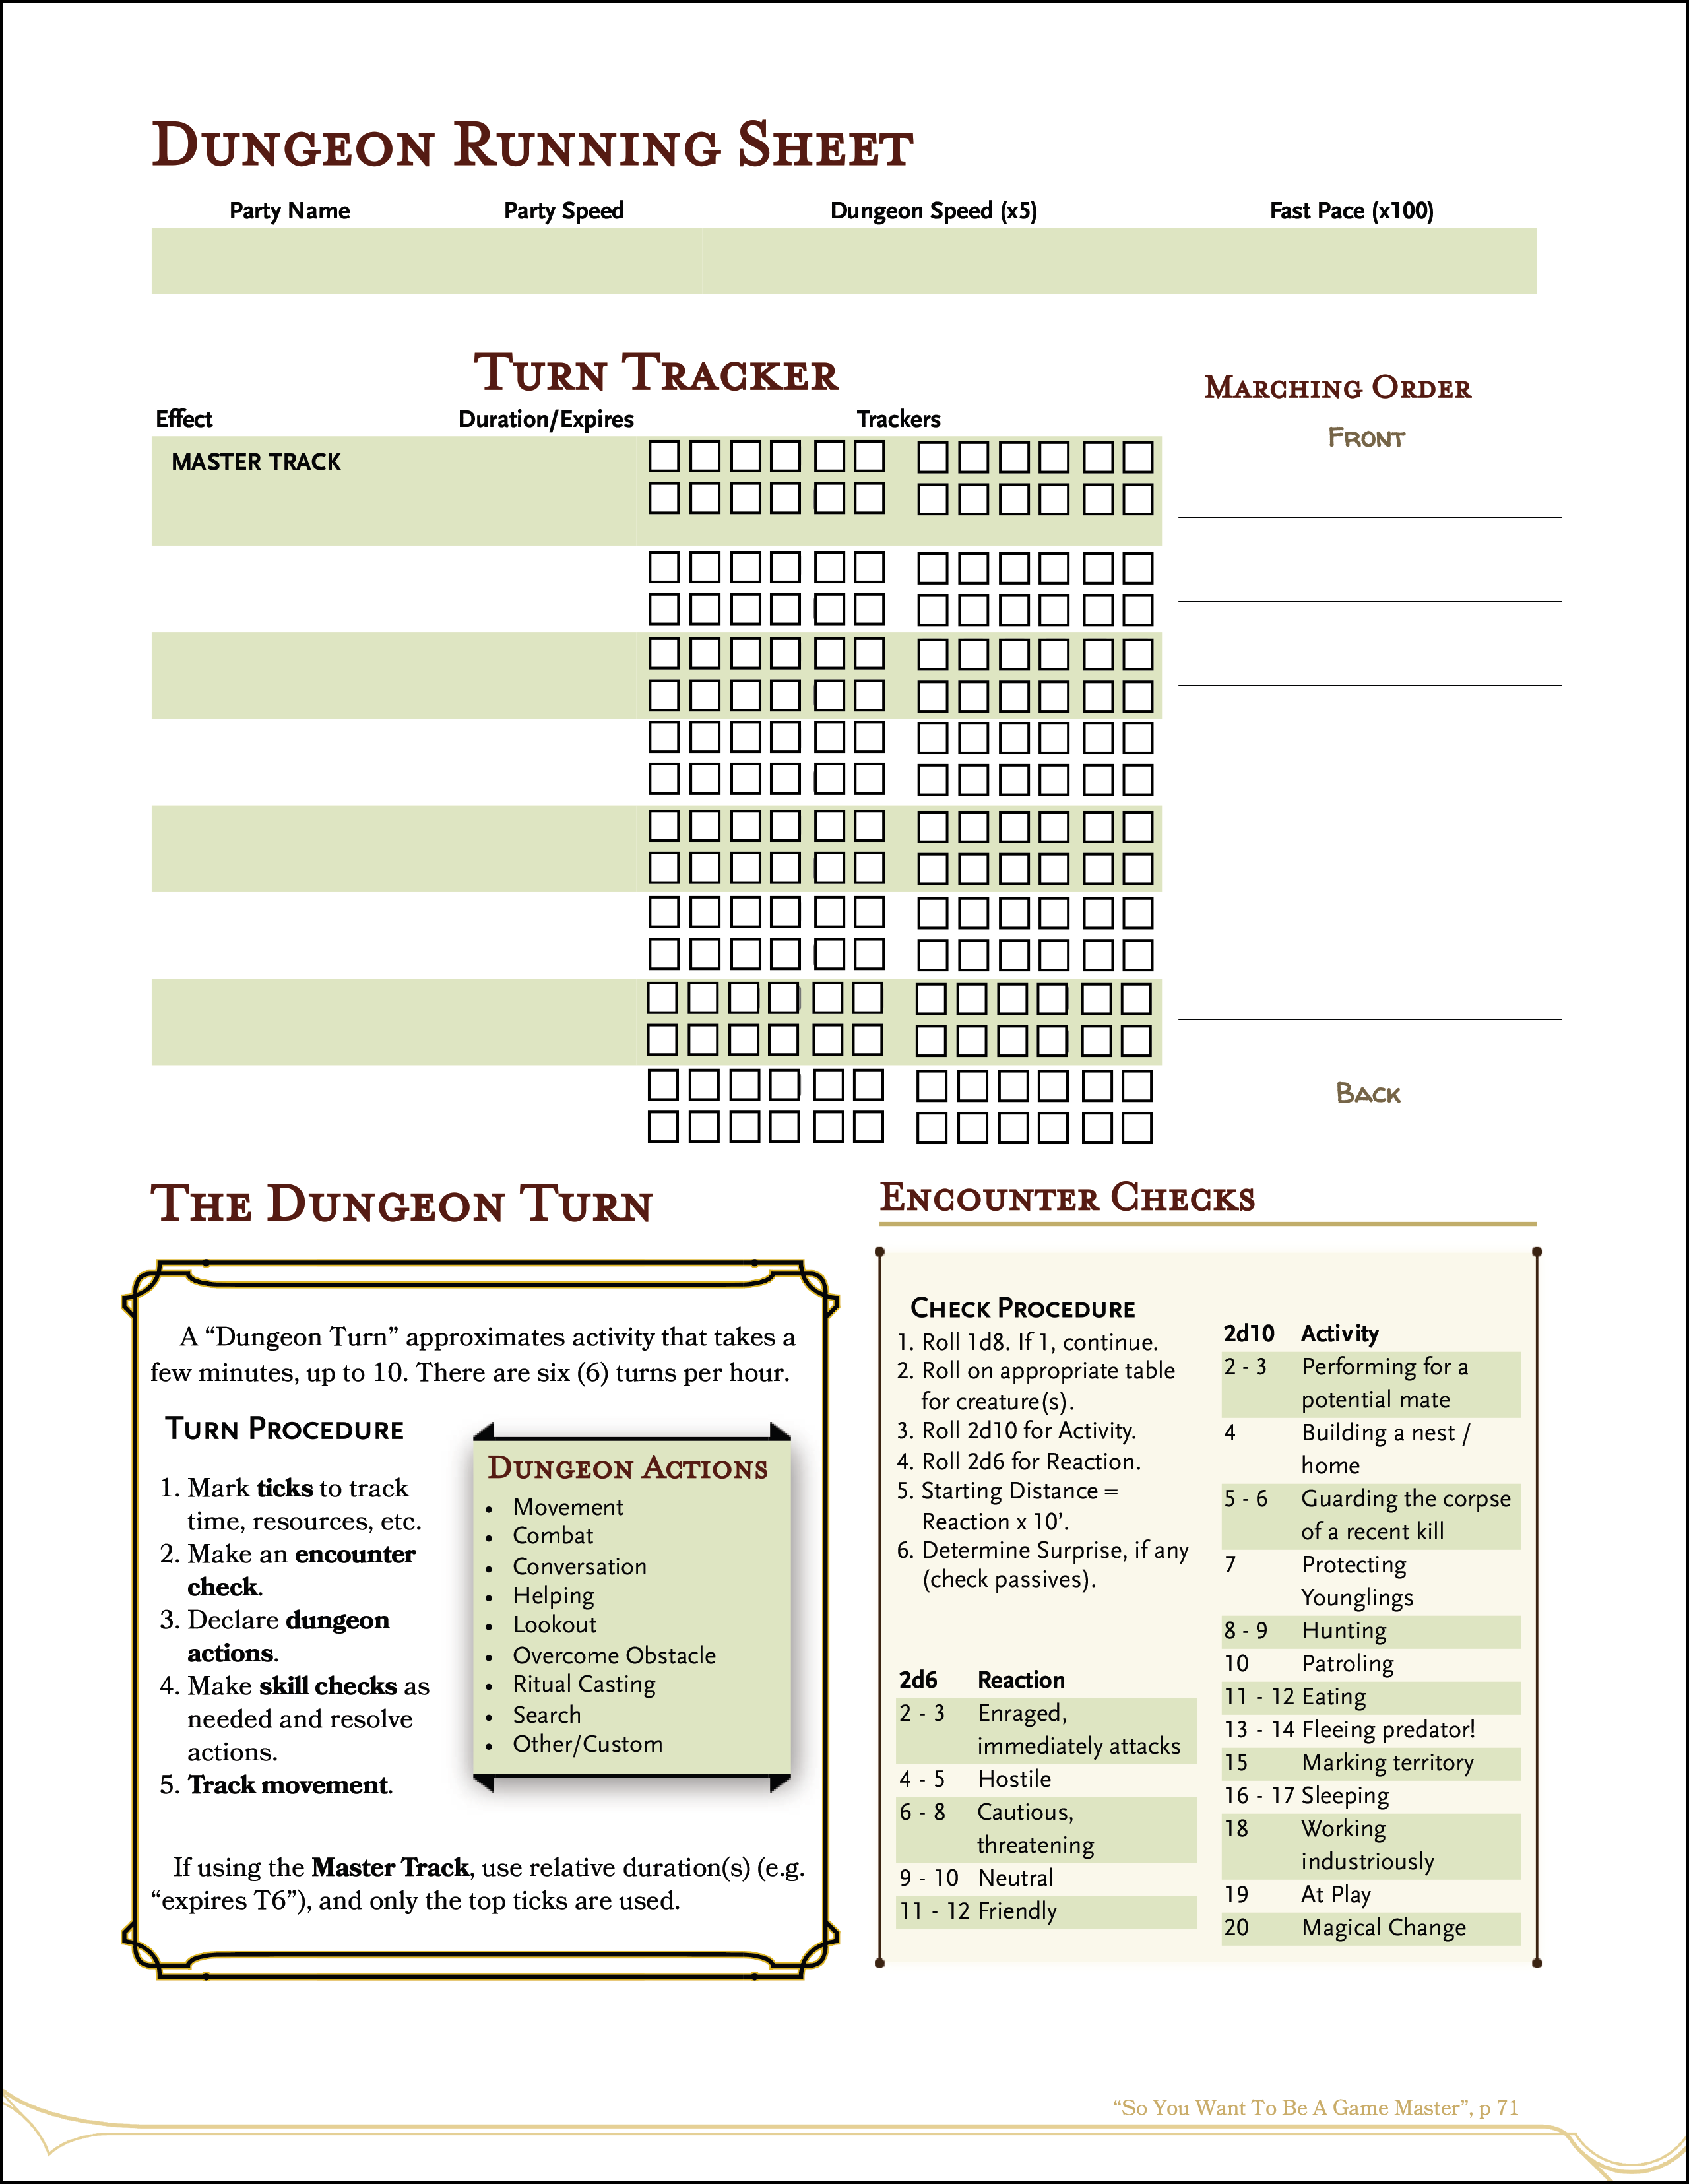 Dungeon Running Sheet - So You Want To Be a Game Master